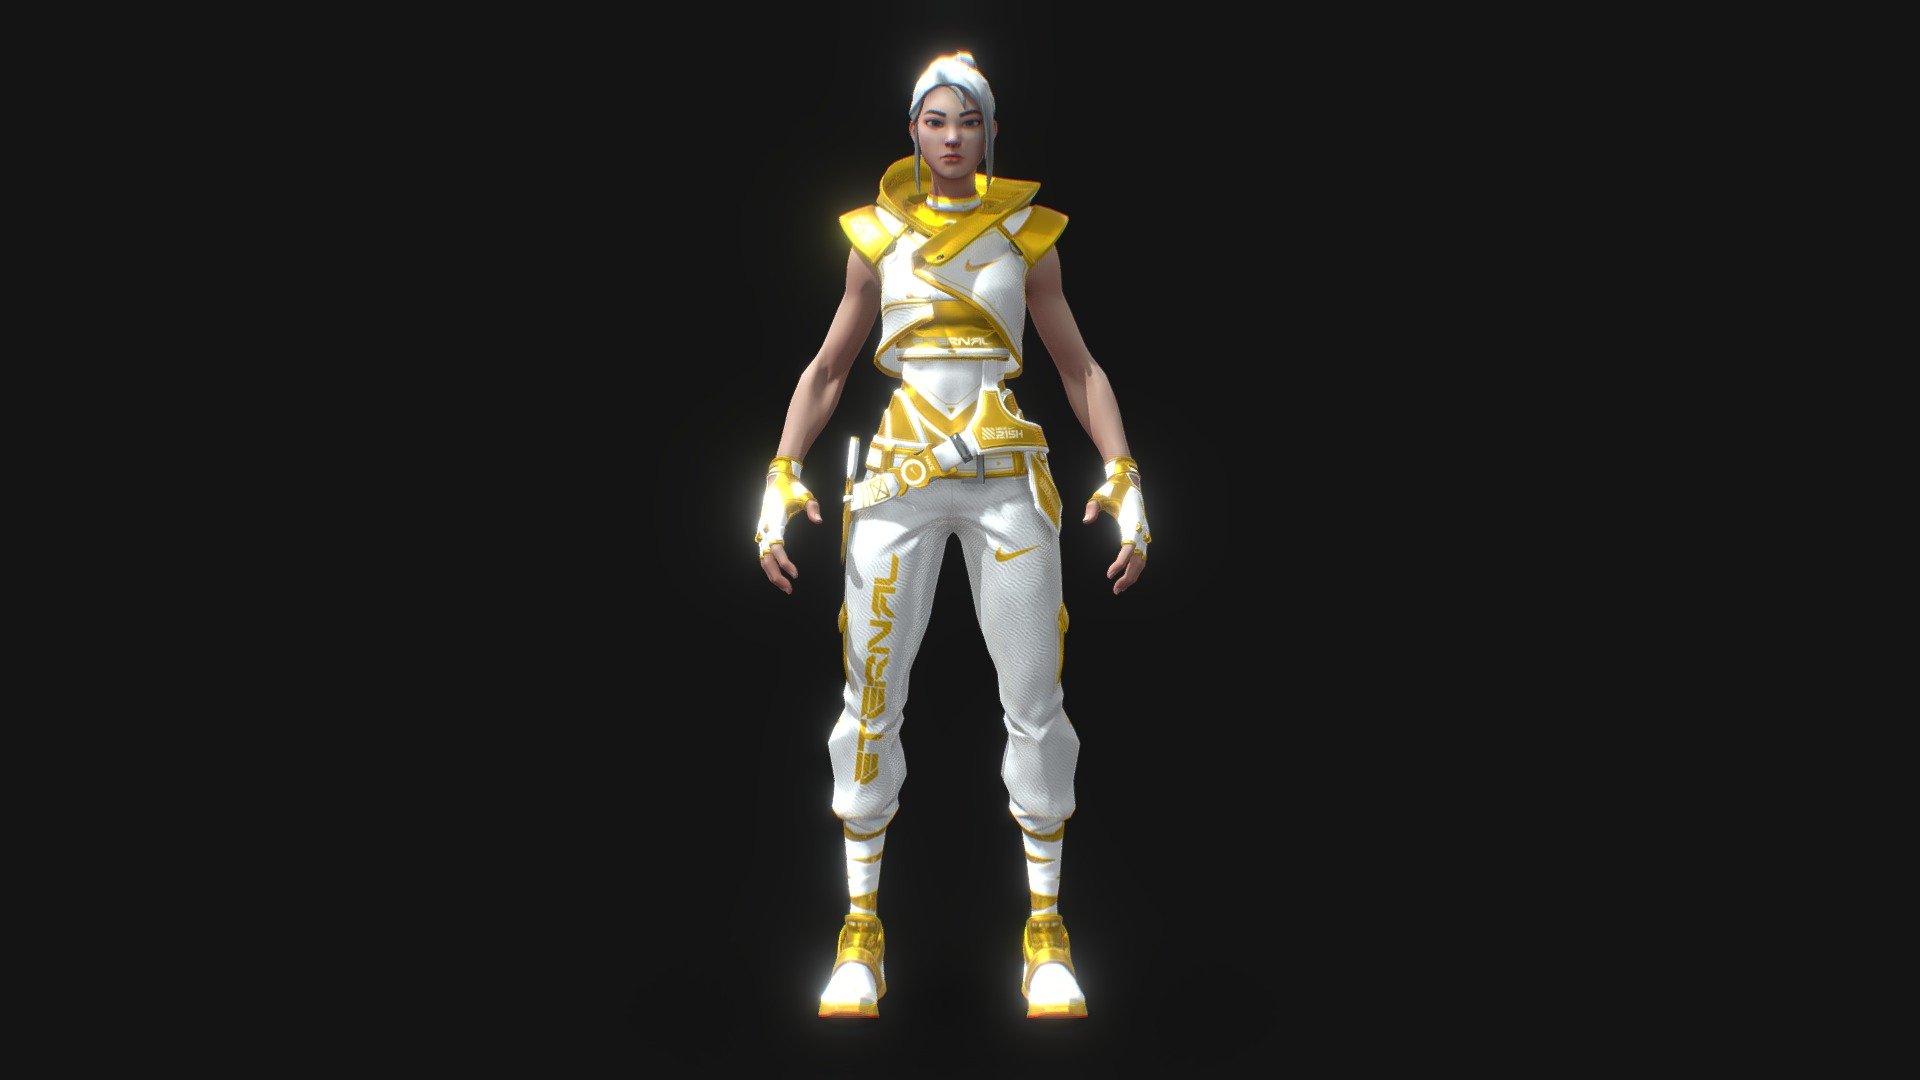 NIKE ETERNAL

Discover the ETERNAL skin for the JETT character on Valorant game. 

Find the other Nike Esport Shop skins on my profile.

Disclaimer : Nike Esport Shop is a fictional project that consists of imagining the future skins made by the equipment manufacturer NIKE in various major esports games.

Socials networks : 





Twitter : https://twitter.com/peiksprod




Instagram : https://www.instagram.com/peiksprod




Youtube : https://www.youtube.com/c/PeiksProd




Behance : https://www.behance.net/peiksprod


 - NIKE ETERNAL - Jett (Valorant) - 3D model by PEIKS 3d model